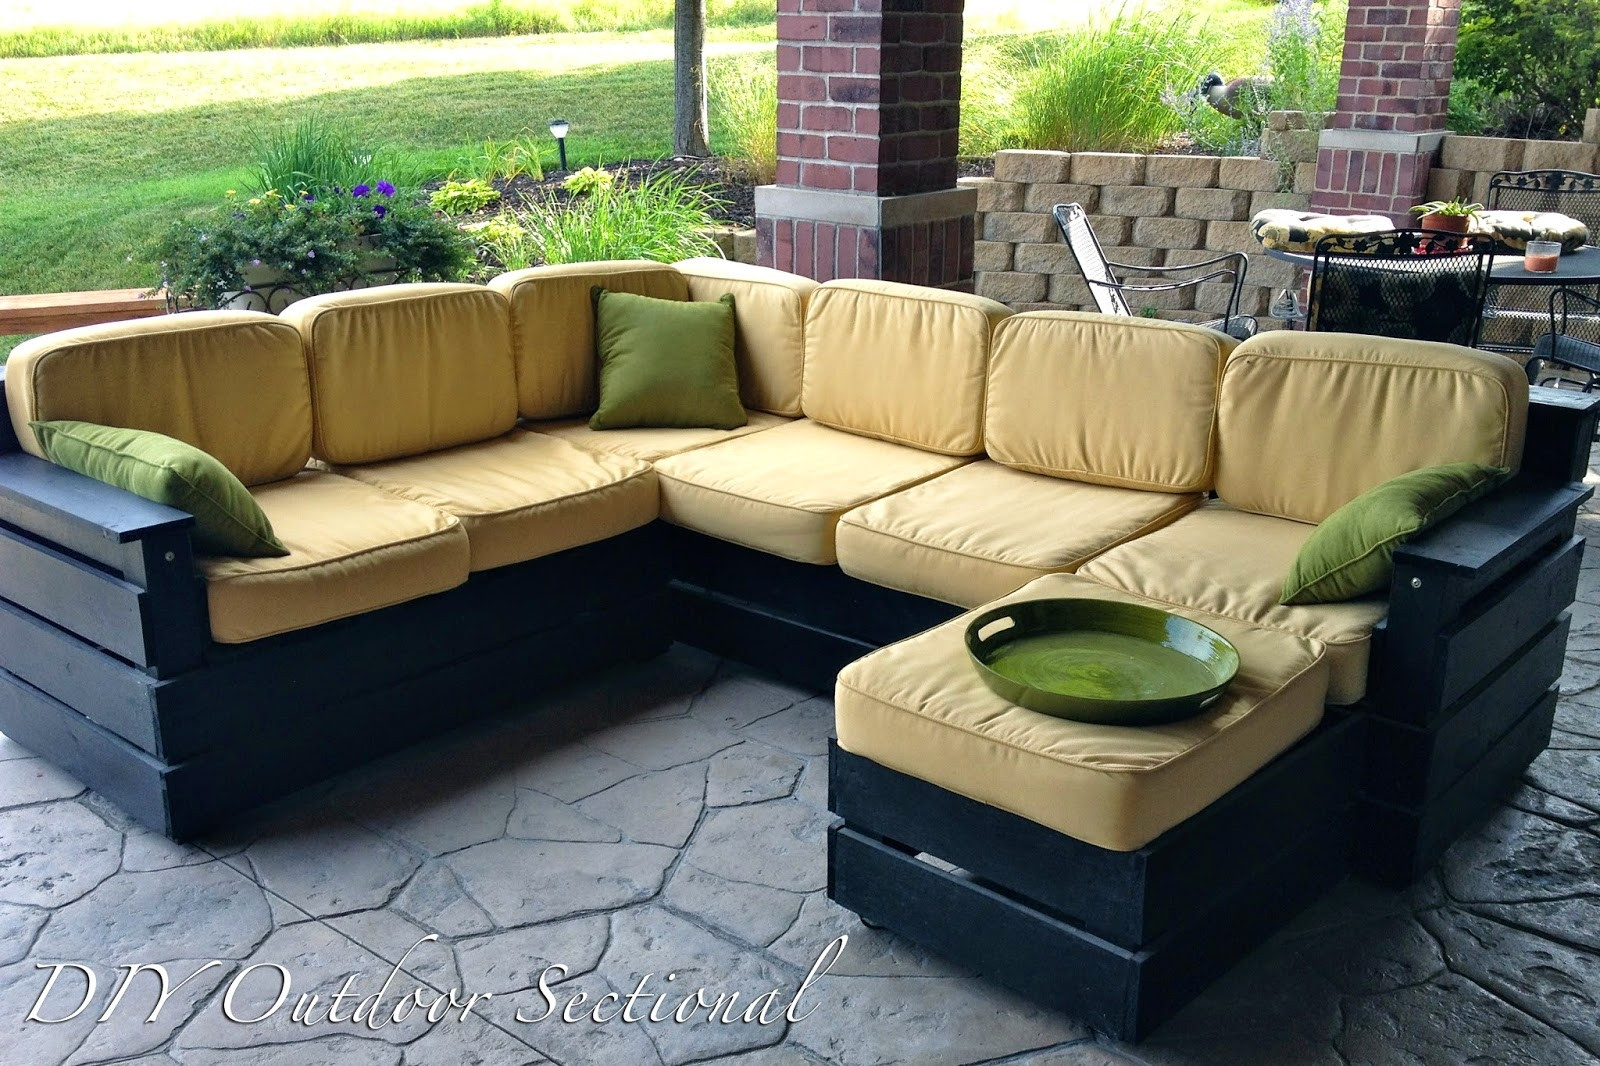 DIY Couch Plans
 12 Best of Diy Sectional Sofa Plans